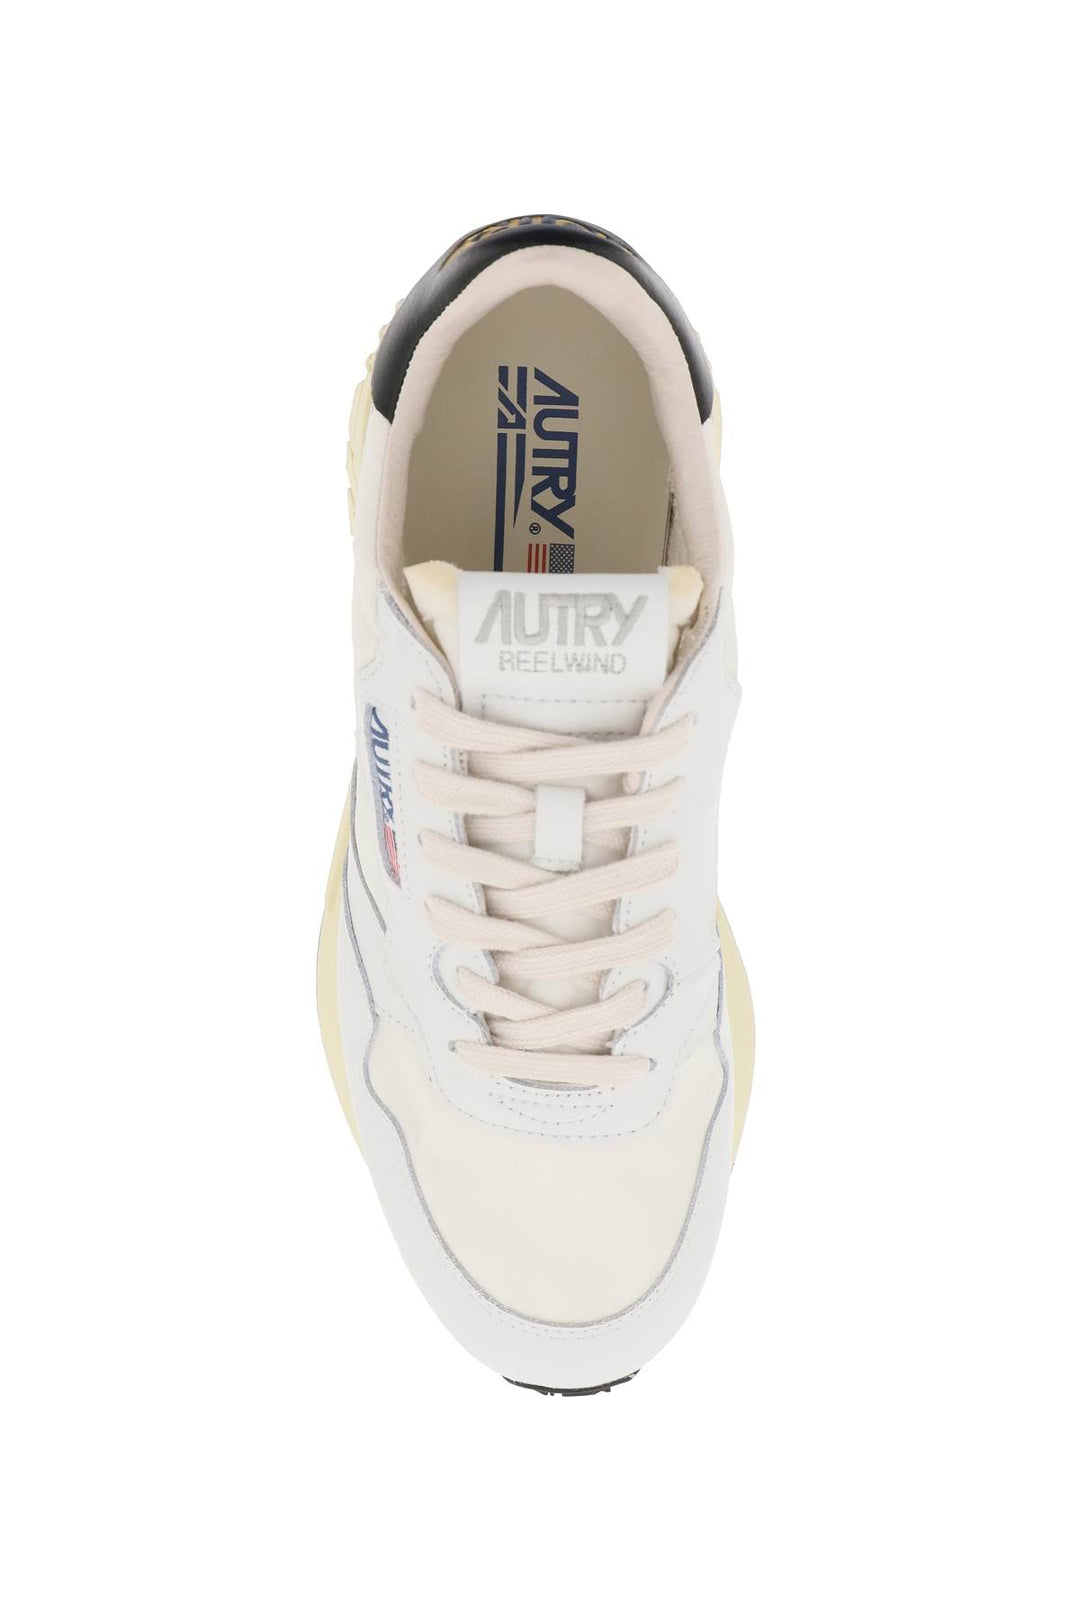 Autry Low Cut Nylon And Leather Reelwind Sneakers   White